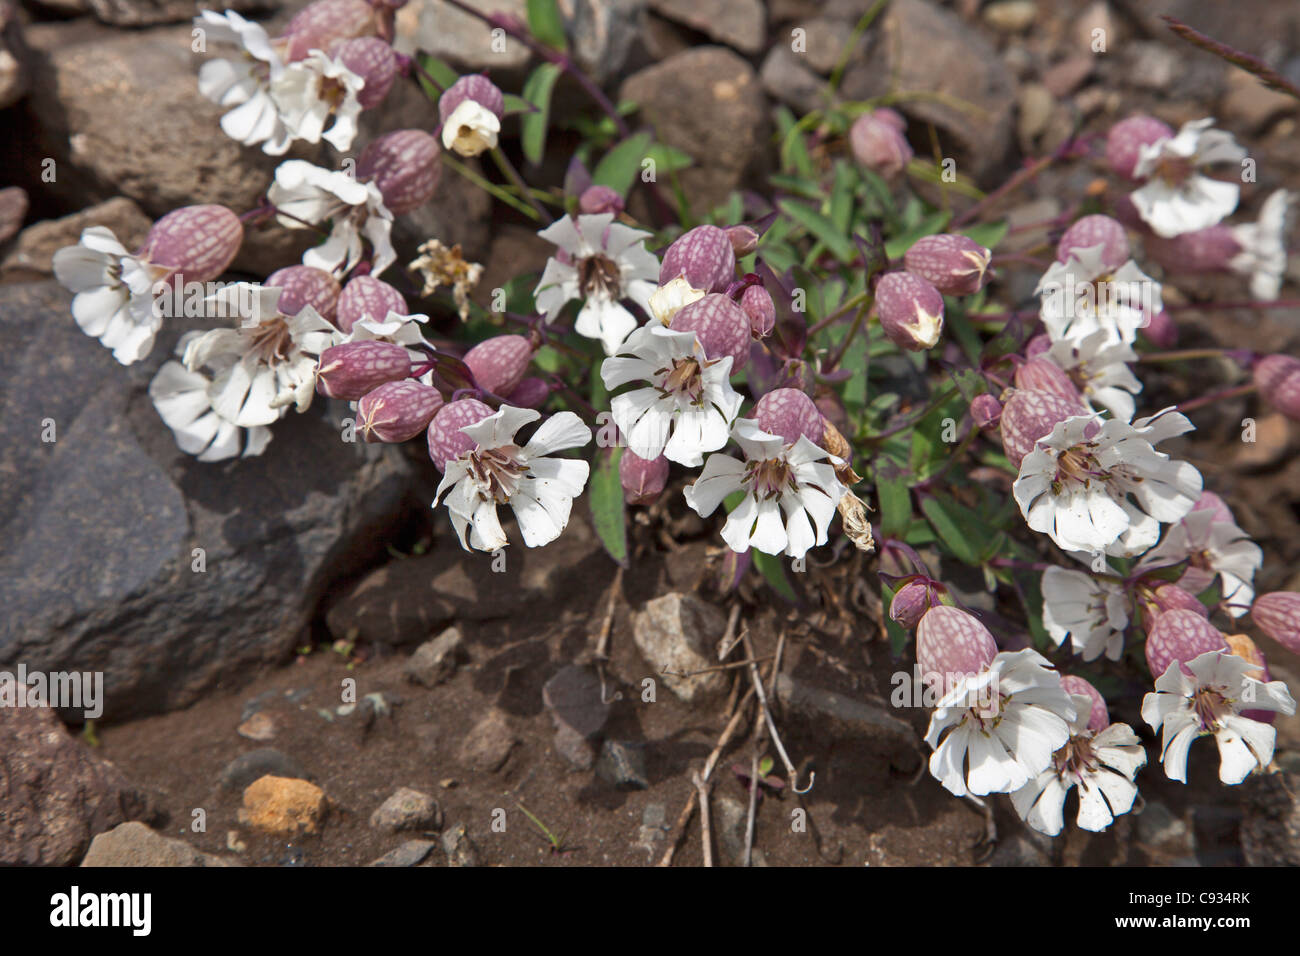 Silene uniflora, known as Sea Campion, is a member of the pink family. Stock Photo